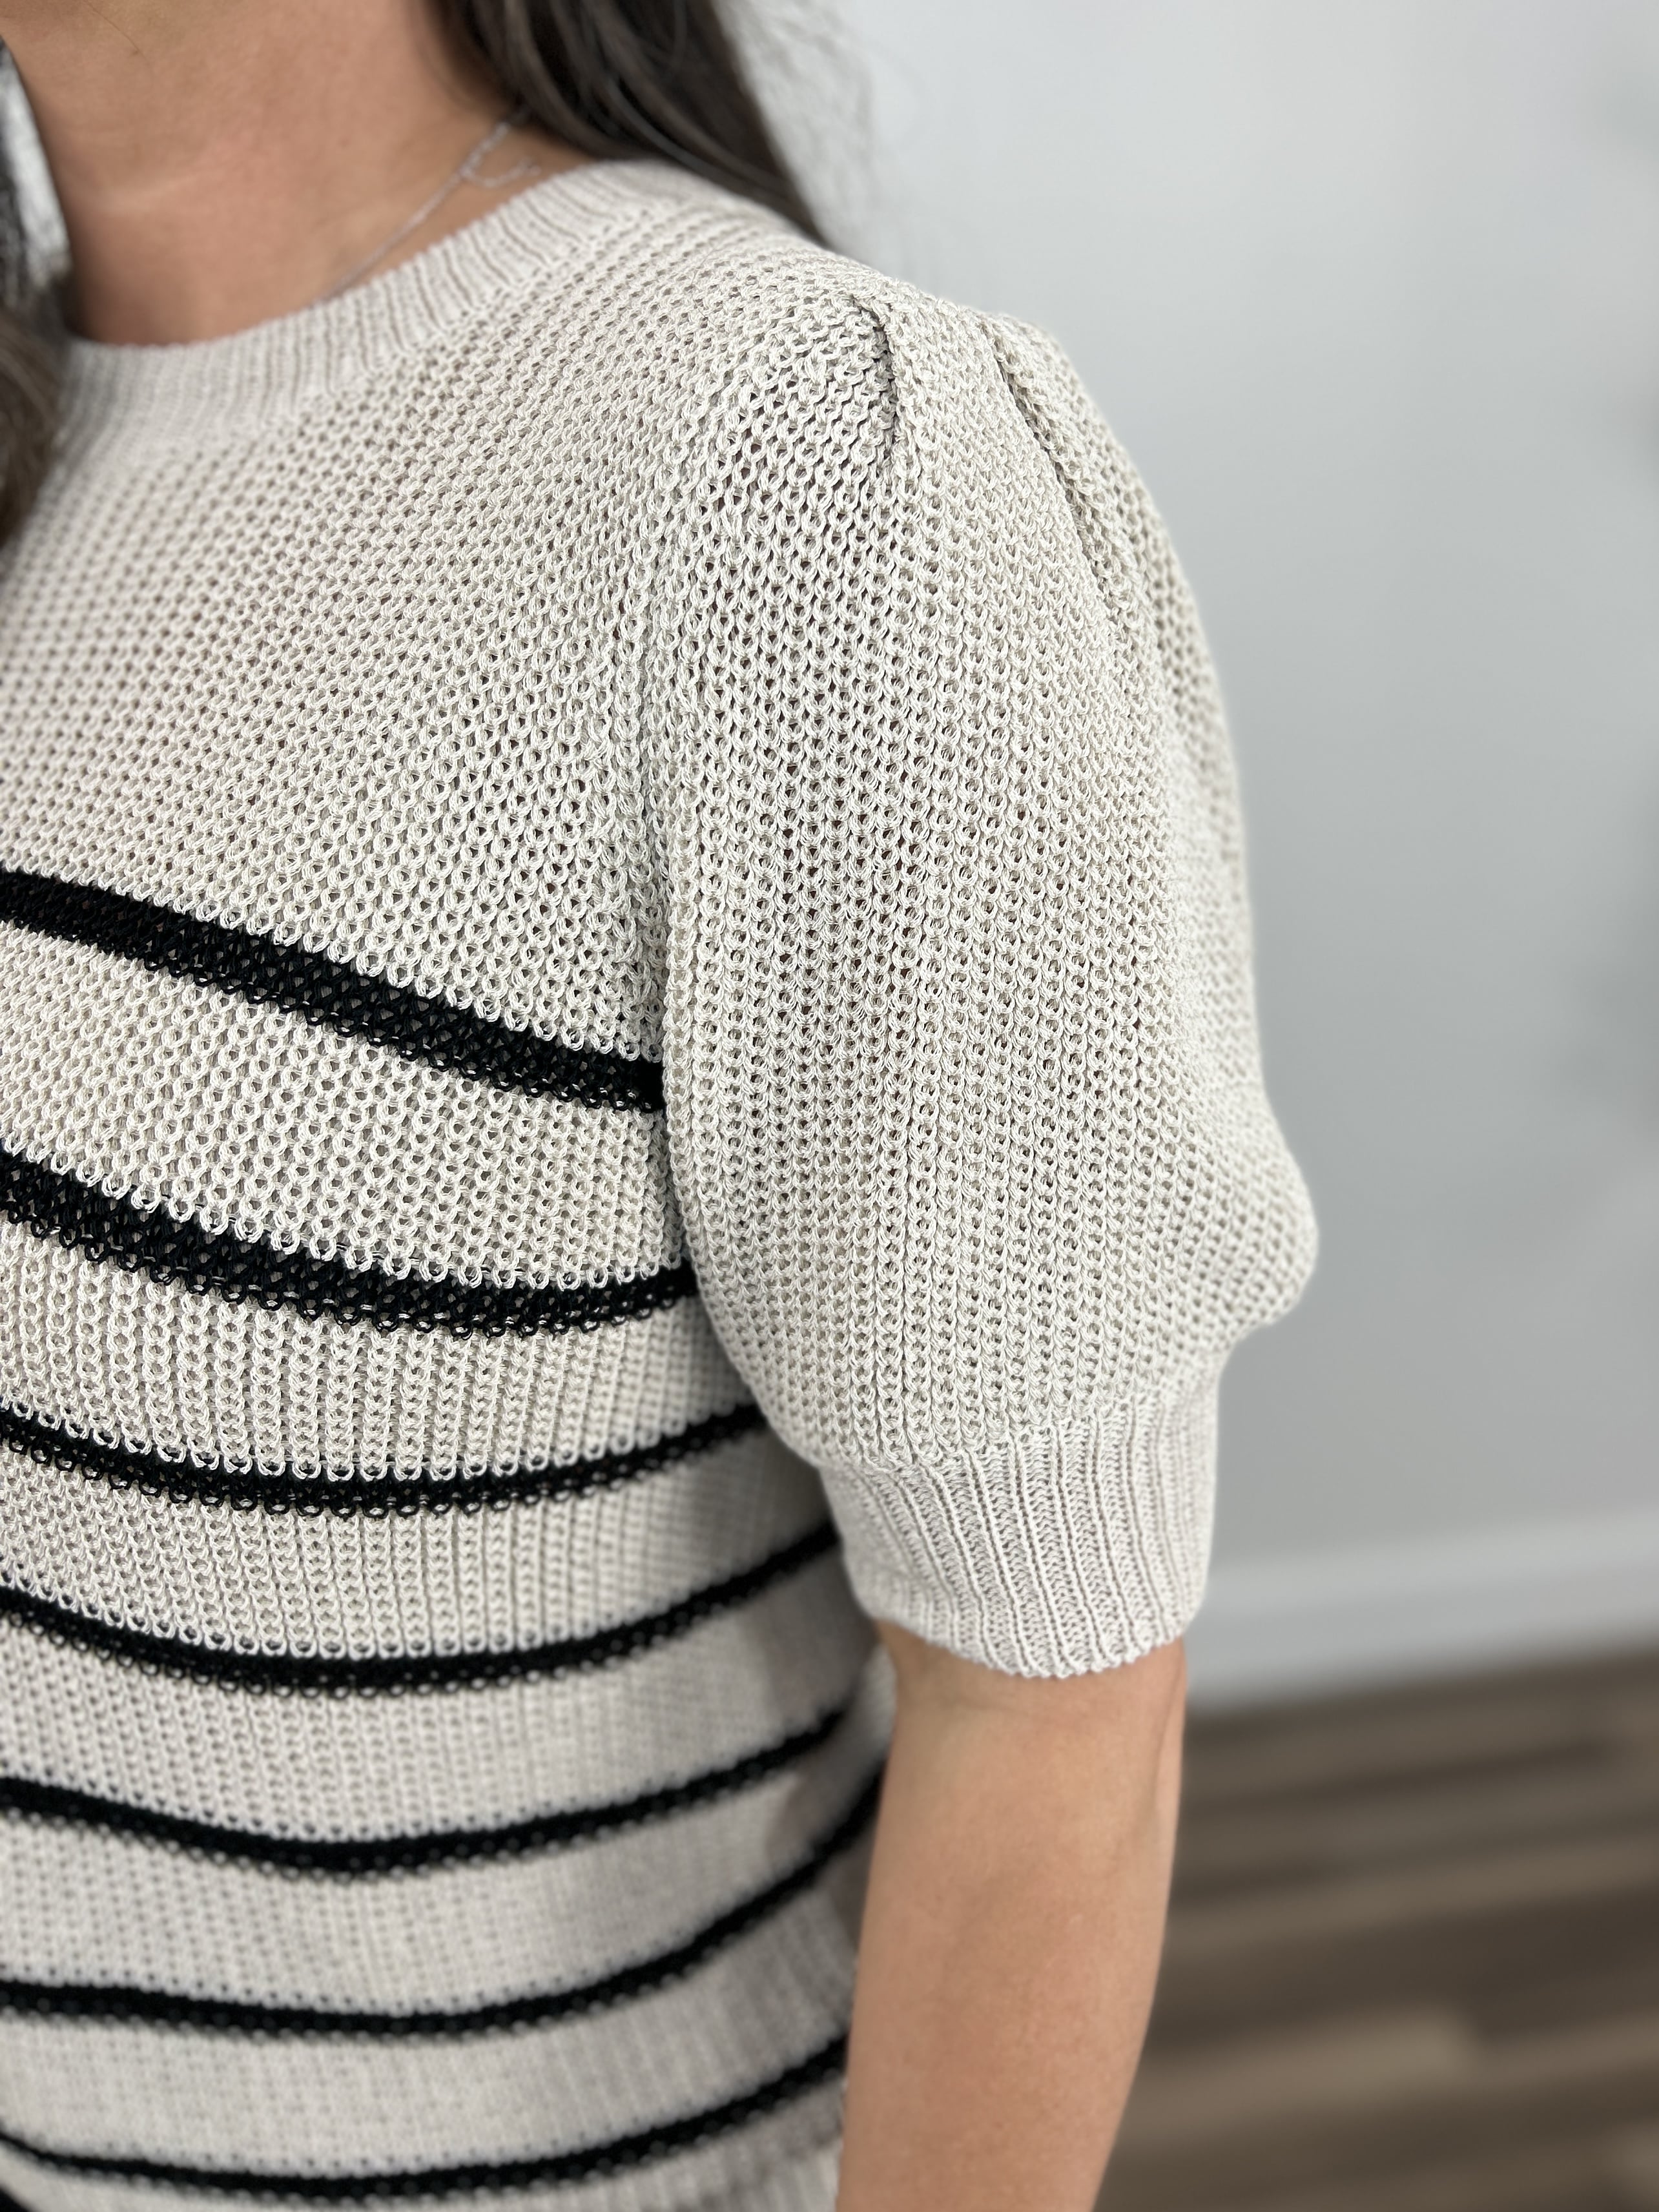 Upclose detailing of the puff short sleeve on the taupe and black striped knit sweater top.